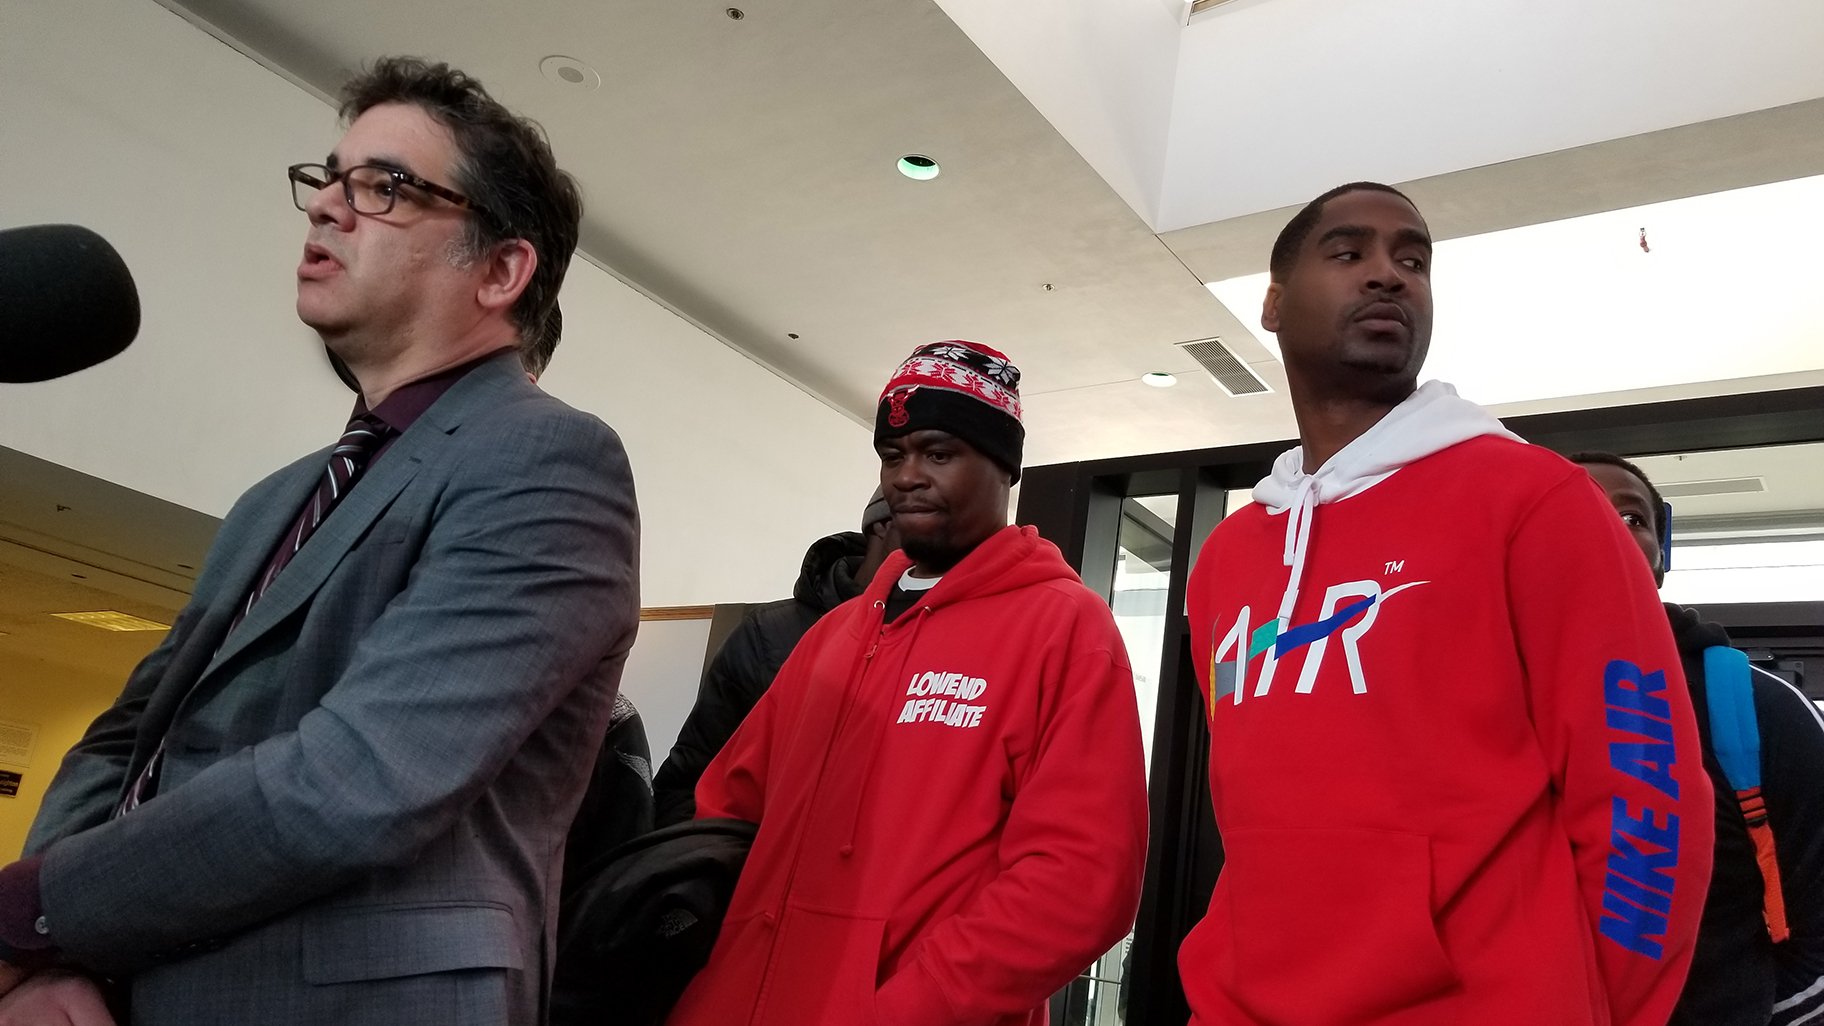 Attorney Josh Tepfer stands beside some of the men who had felony drug convictions vacated Tuesday during a hearing at the Leighton Criminal Court Building. (Matt Masterson / WTTW News)